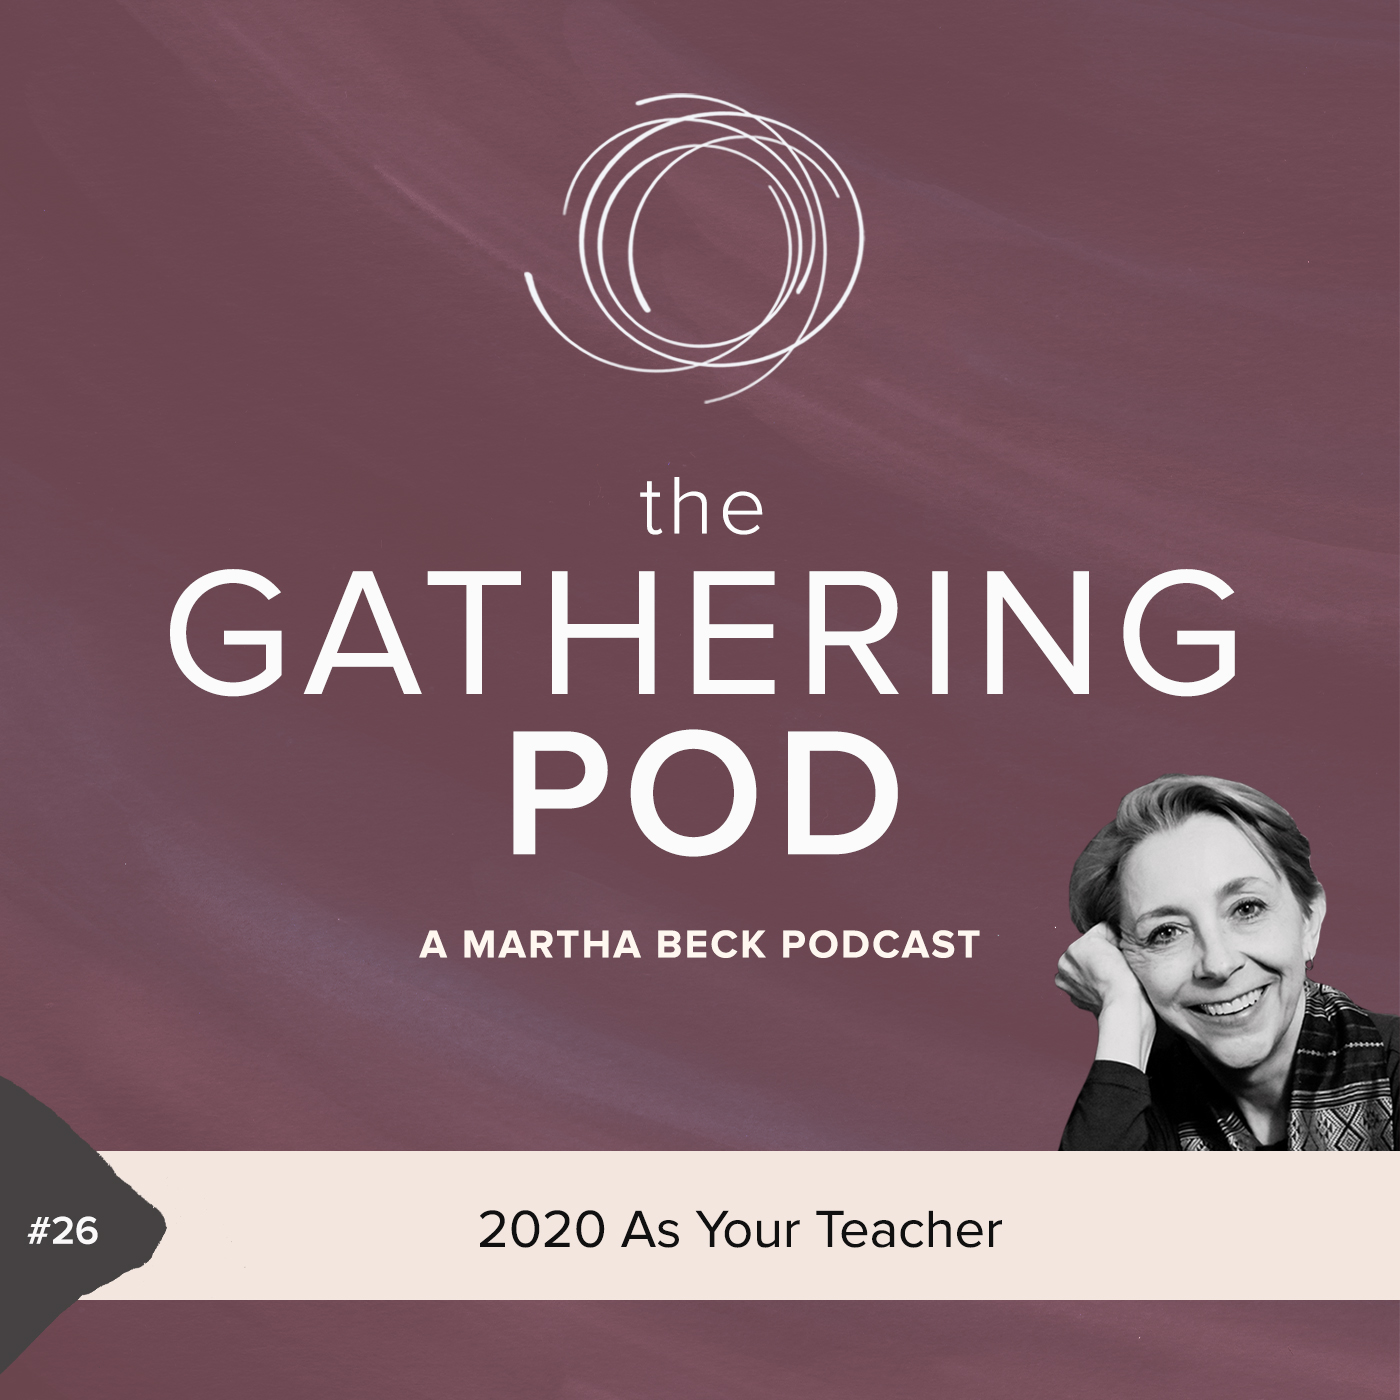 Image for The Gathering Pod A Martha Beck Podcast Episode #26 2020 As Your Teacher